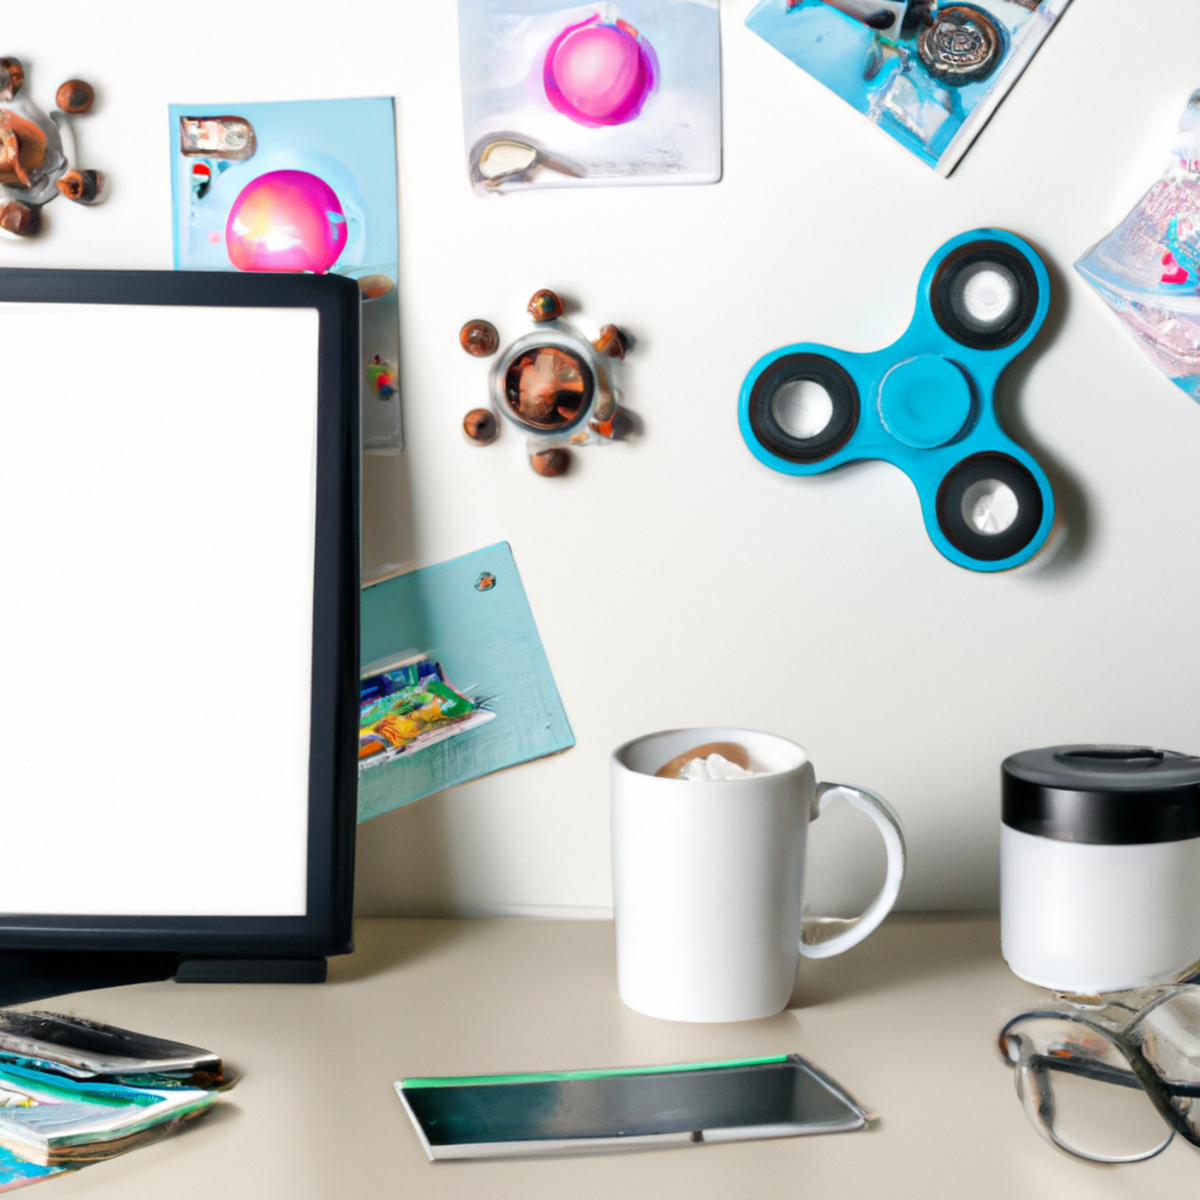 Cluttered desk with coffee mug, papers, computer, stress ball, fidget spinner, and beach photo. Suggests need for stress management.